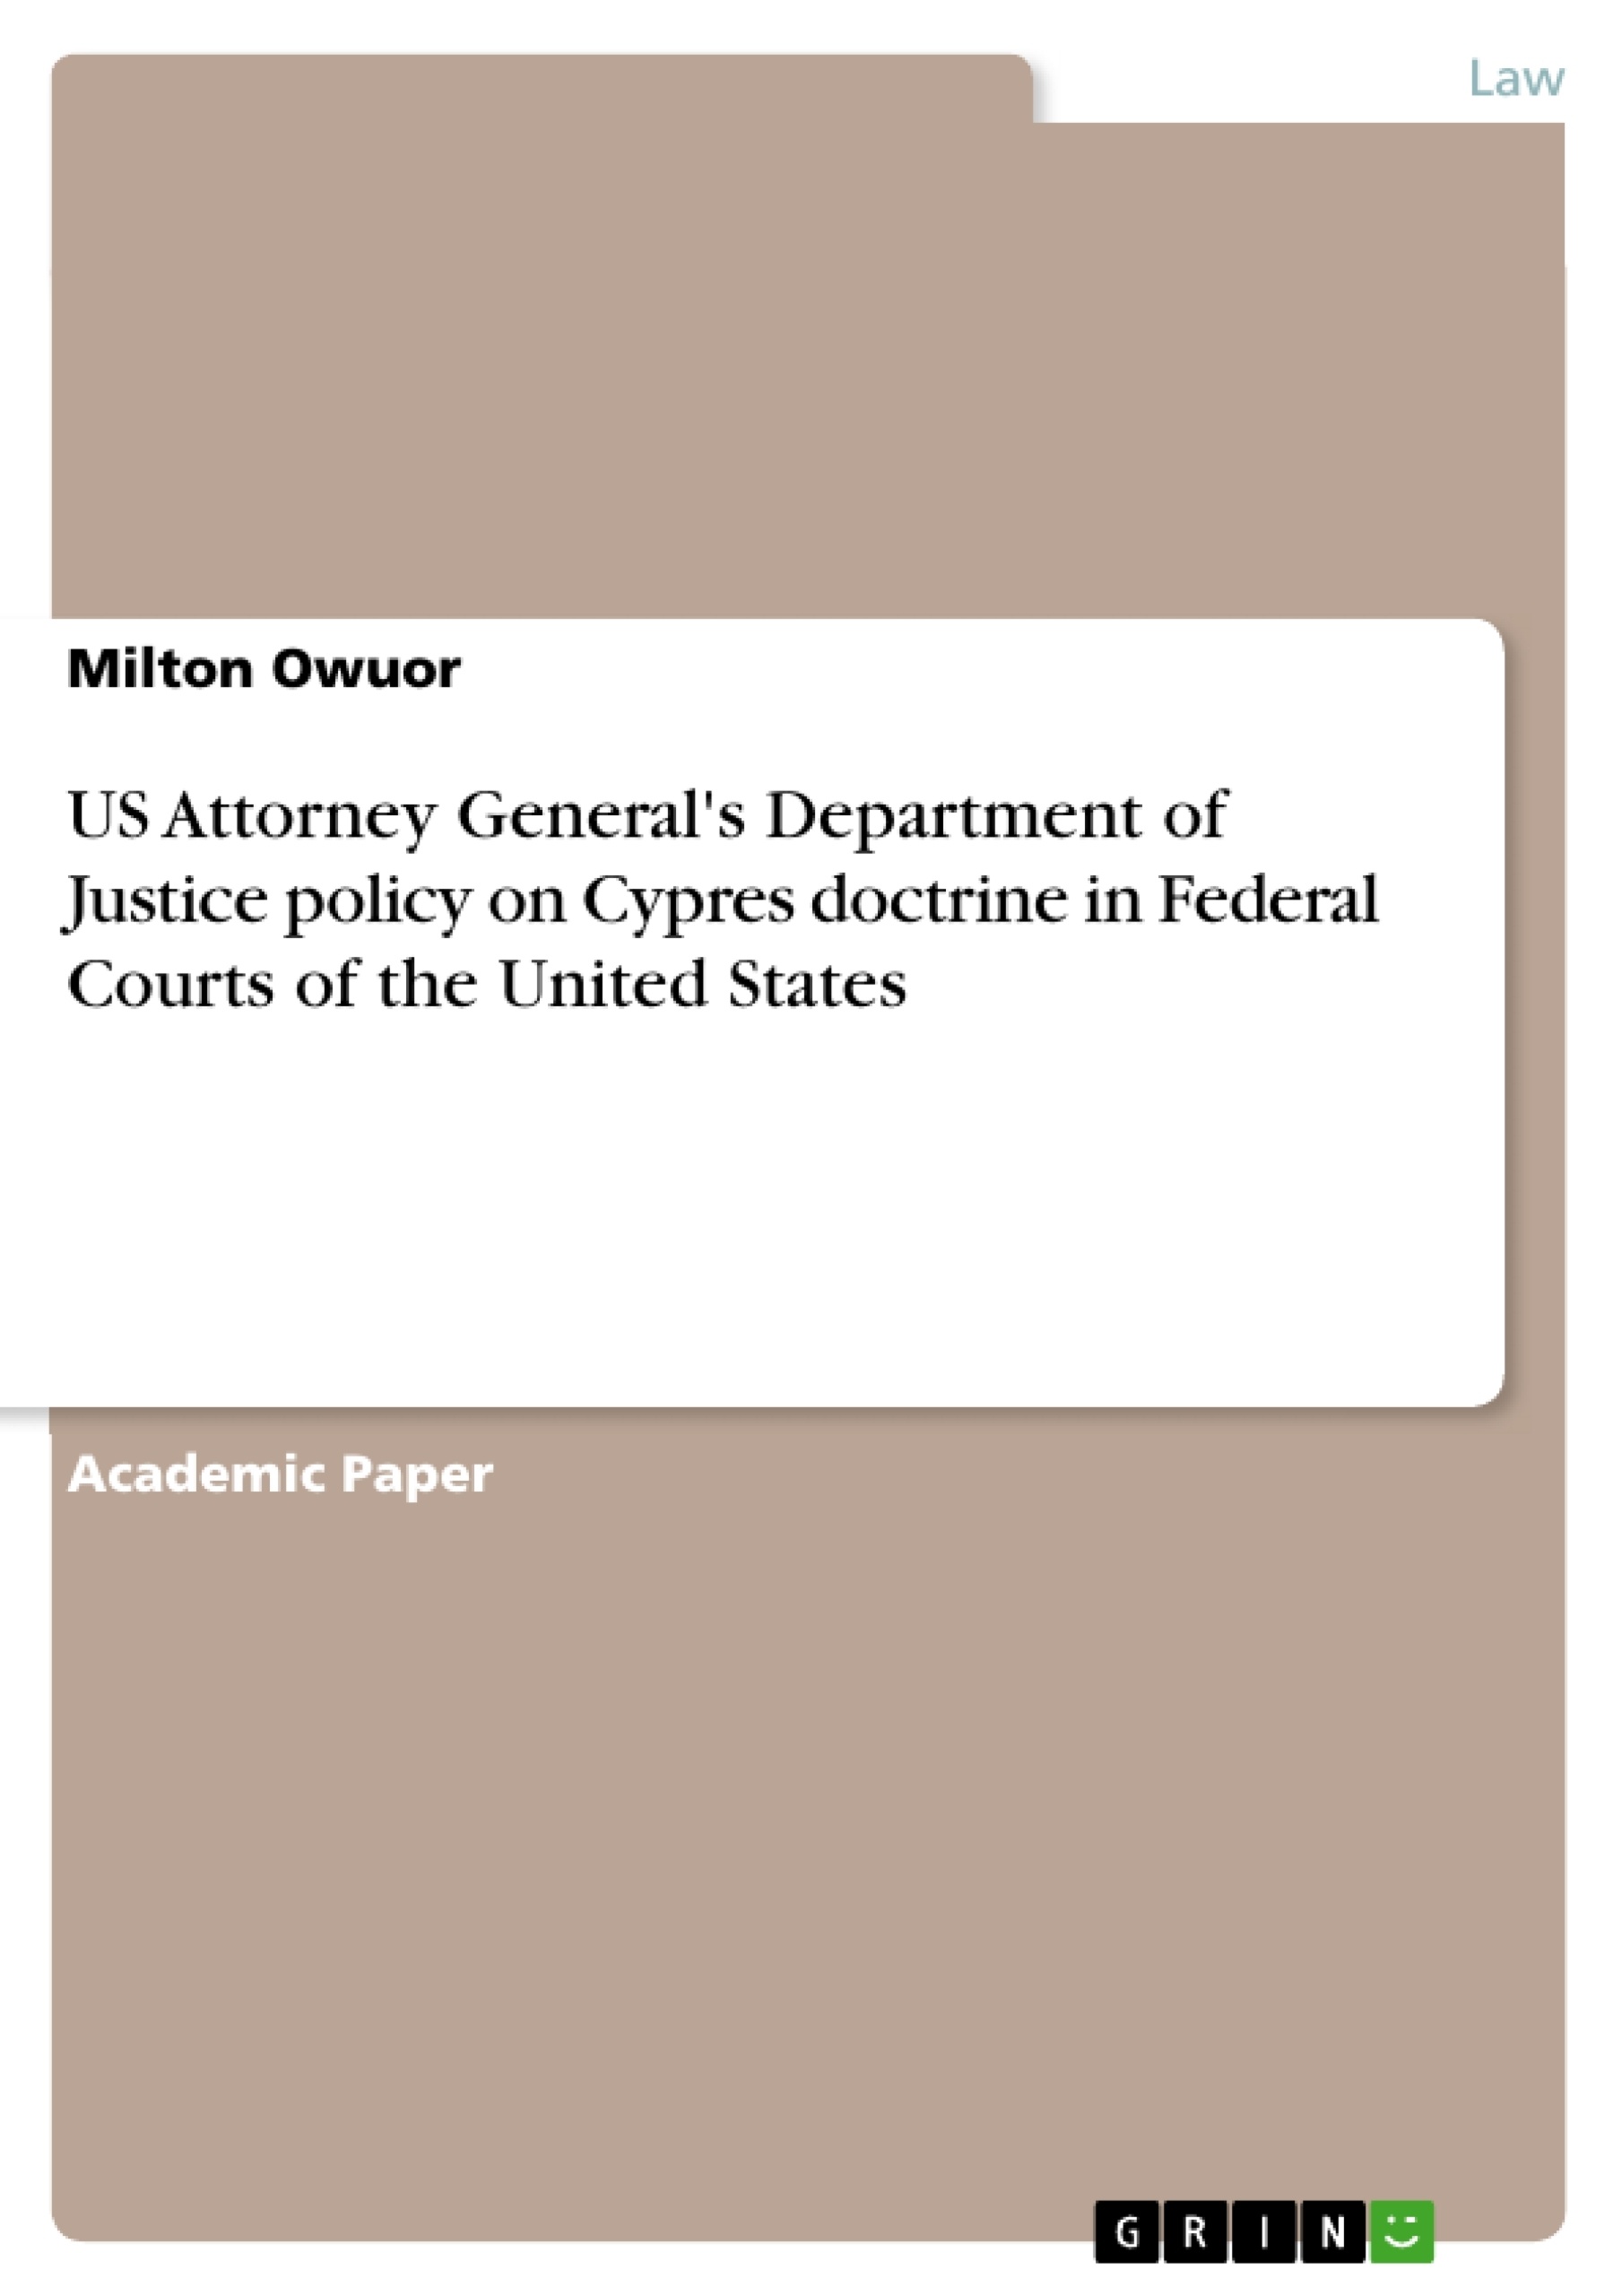 Title: US Attorney General's Department of Justice policy on Cypres doctrine in Federal Courts of the United States